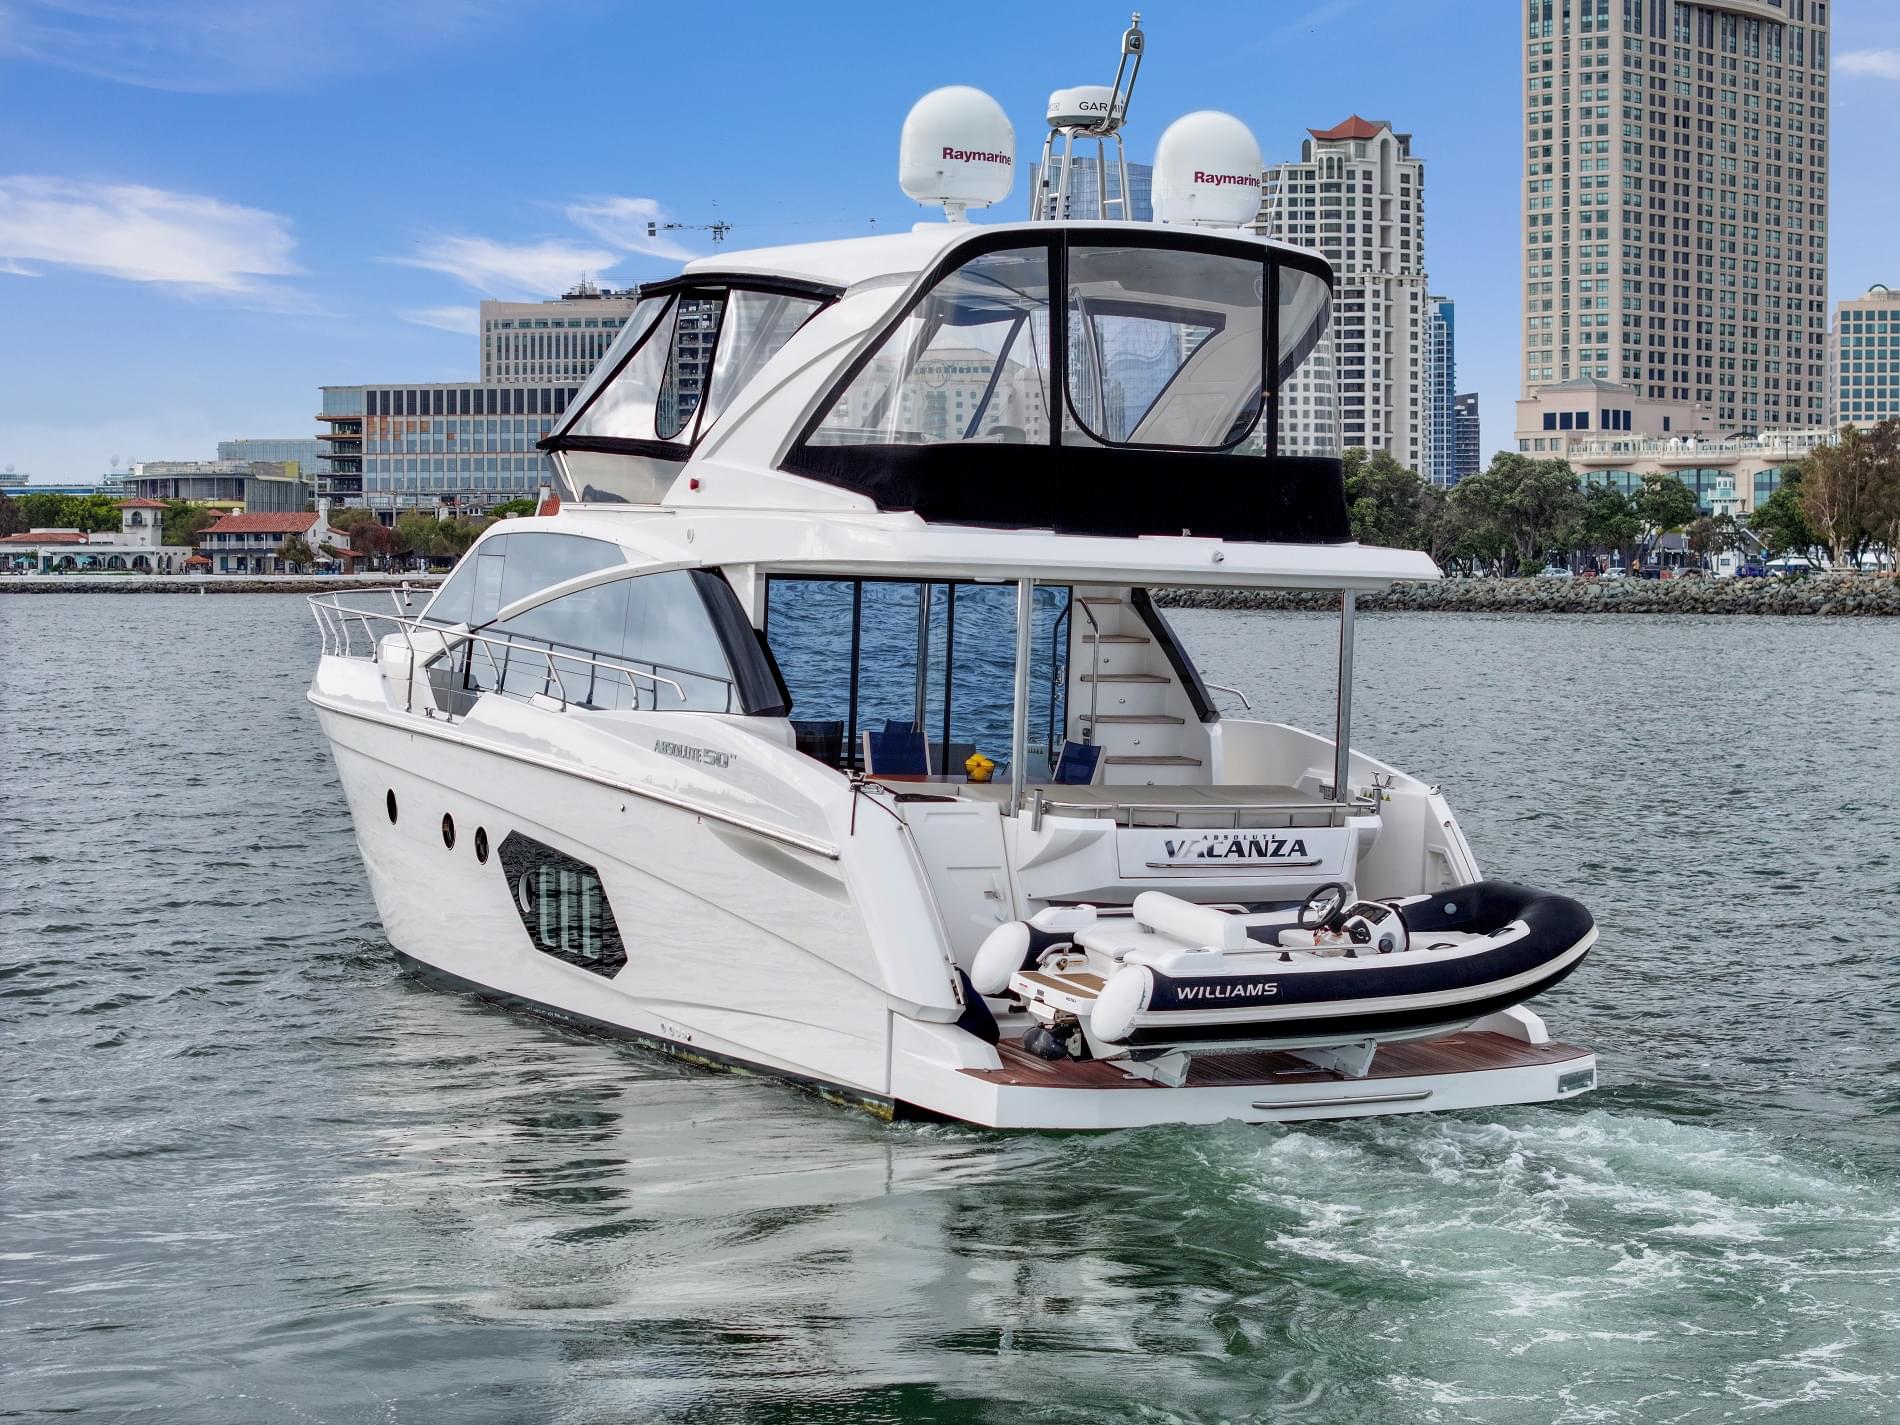 San Diego, California Fractional Opportunity: The Absolute 50 Fly “Vacanza”